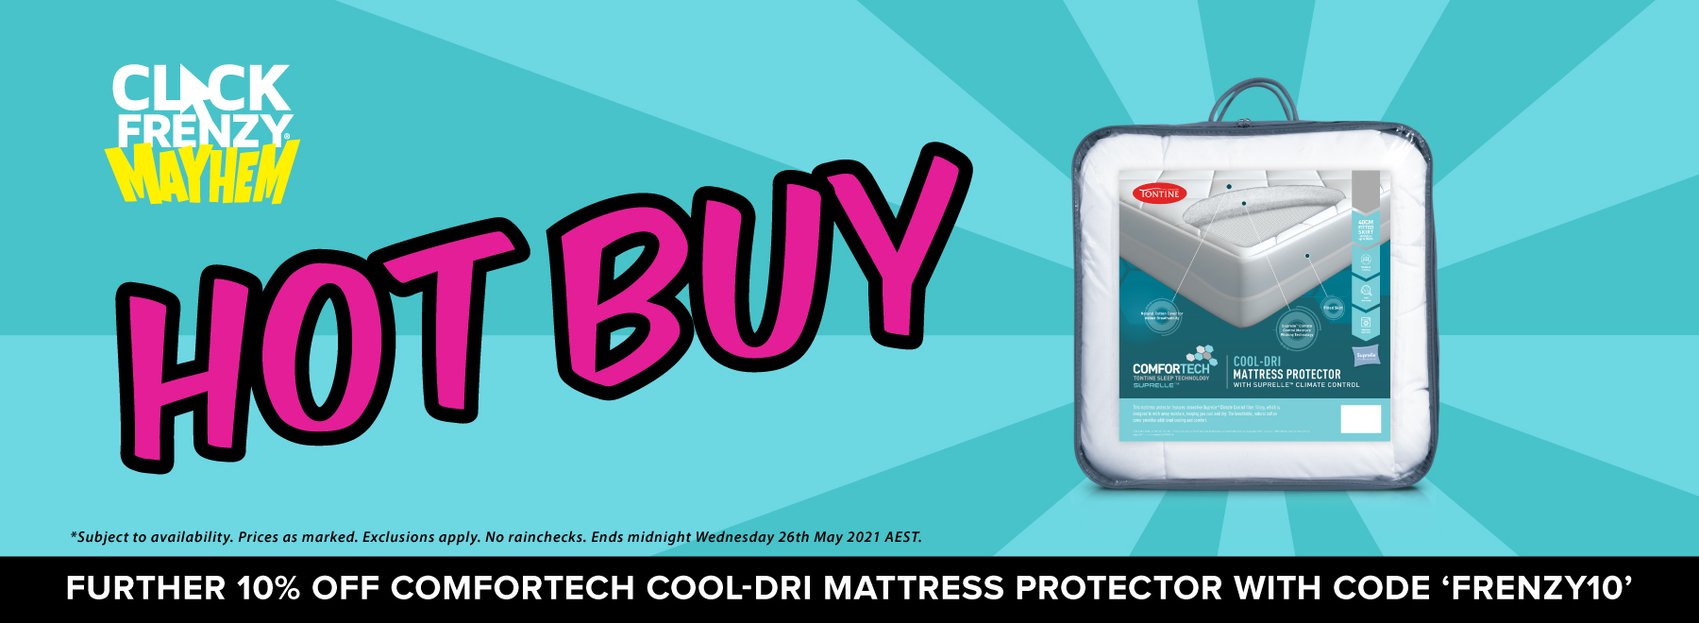 Save 40% off on Tontine comfortech cool dri mattress protector plus further 10% OFF